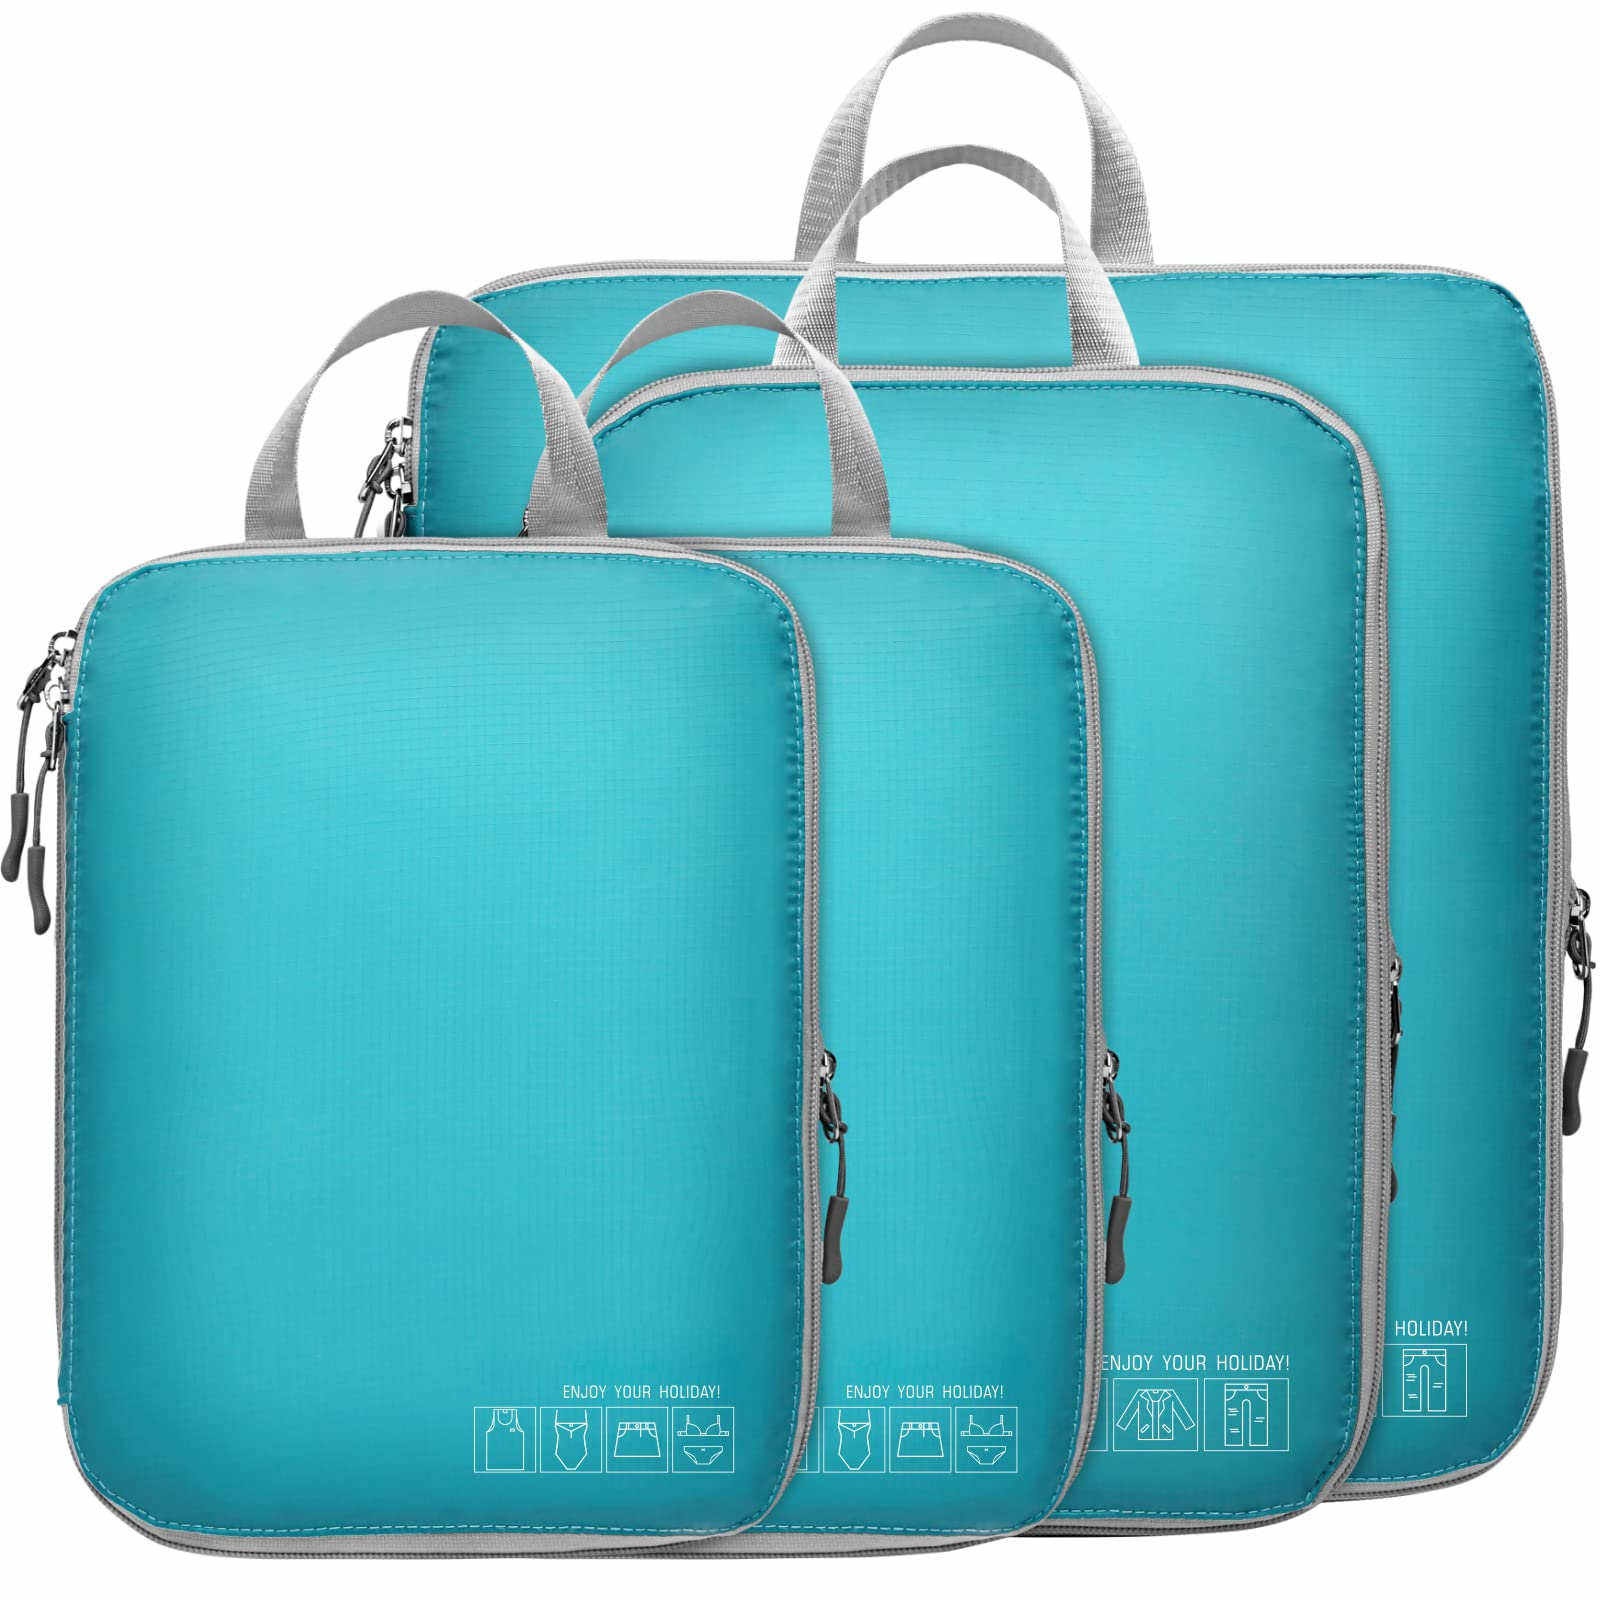 4 Pack Packing Cubes for Travel Luggage Product Details